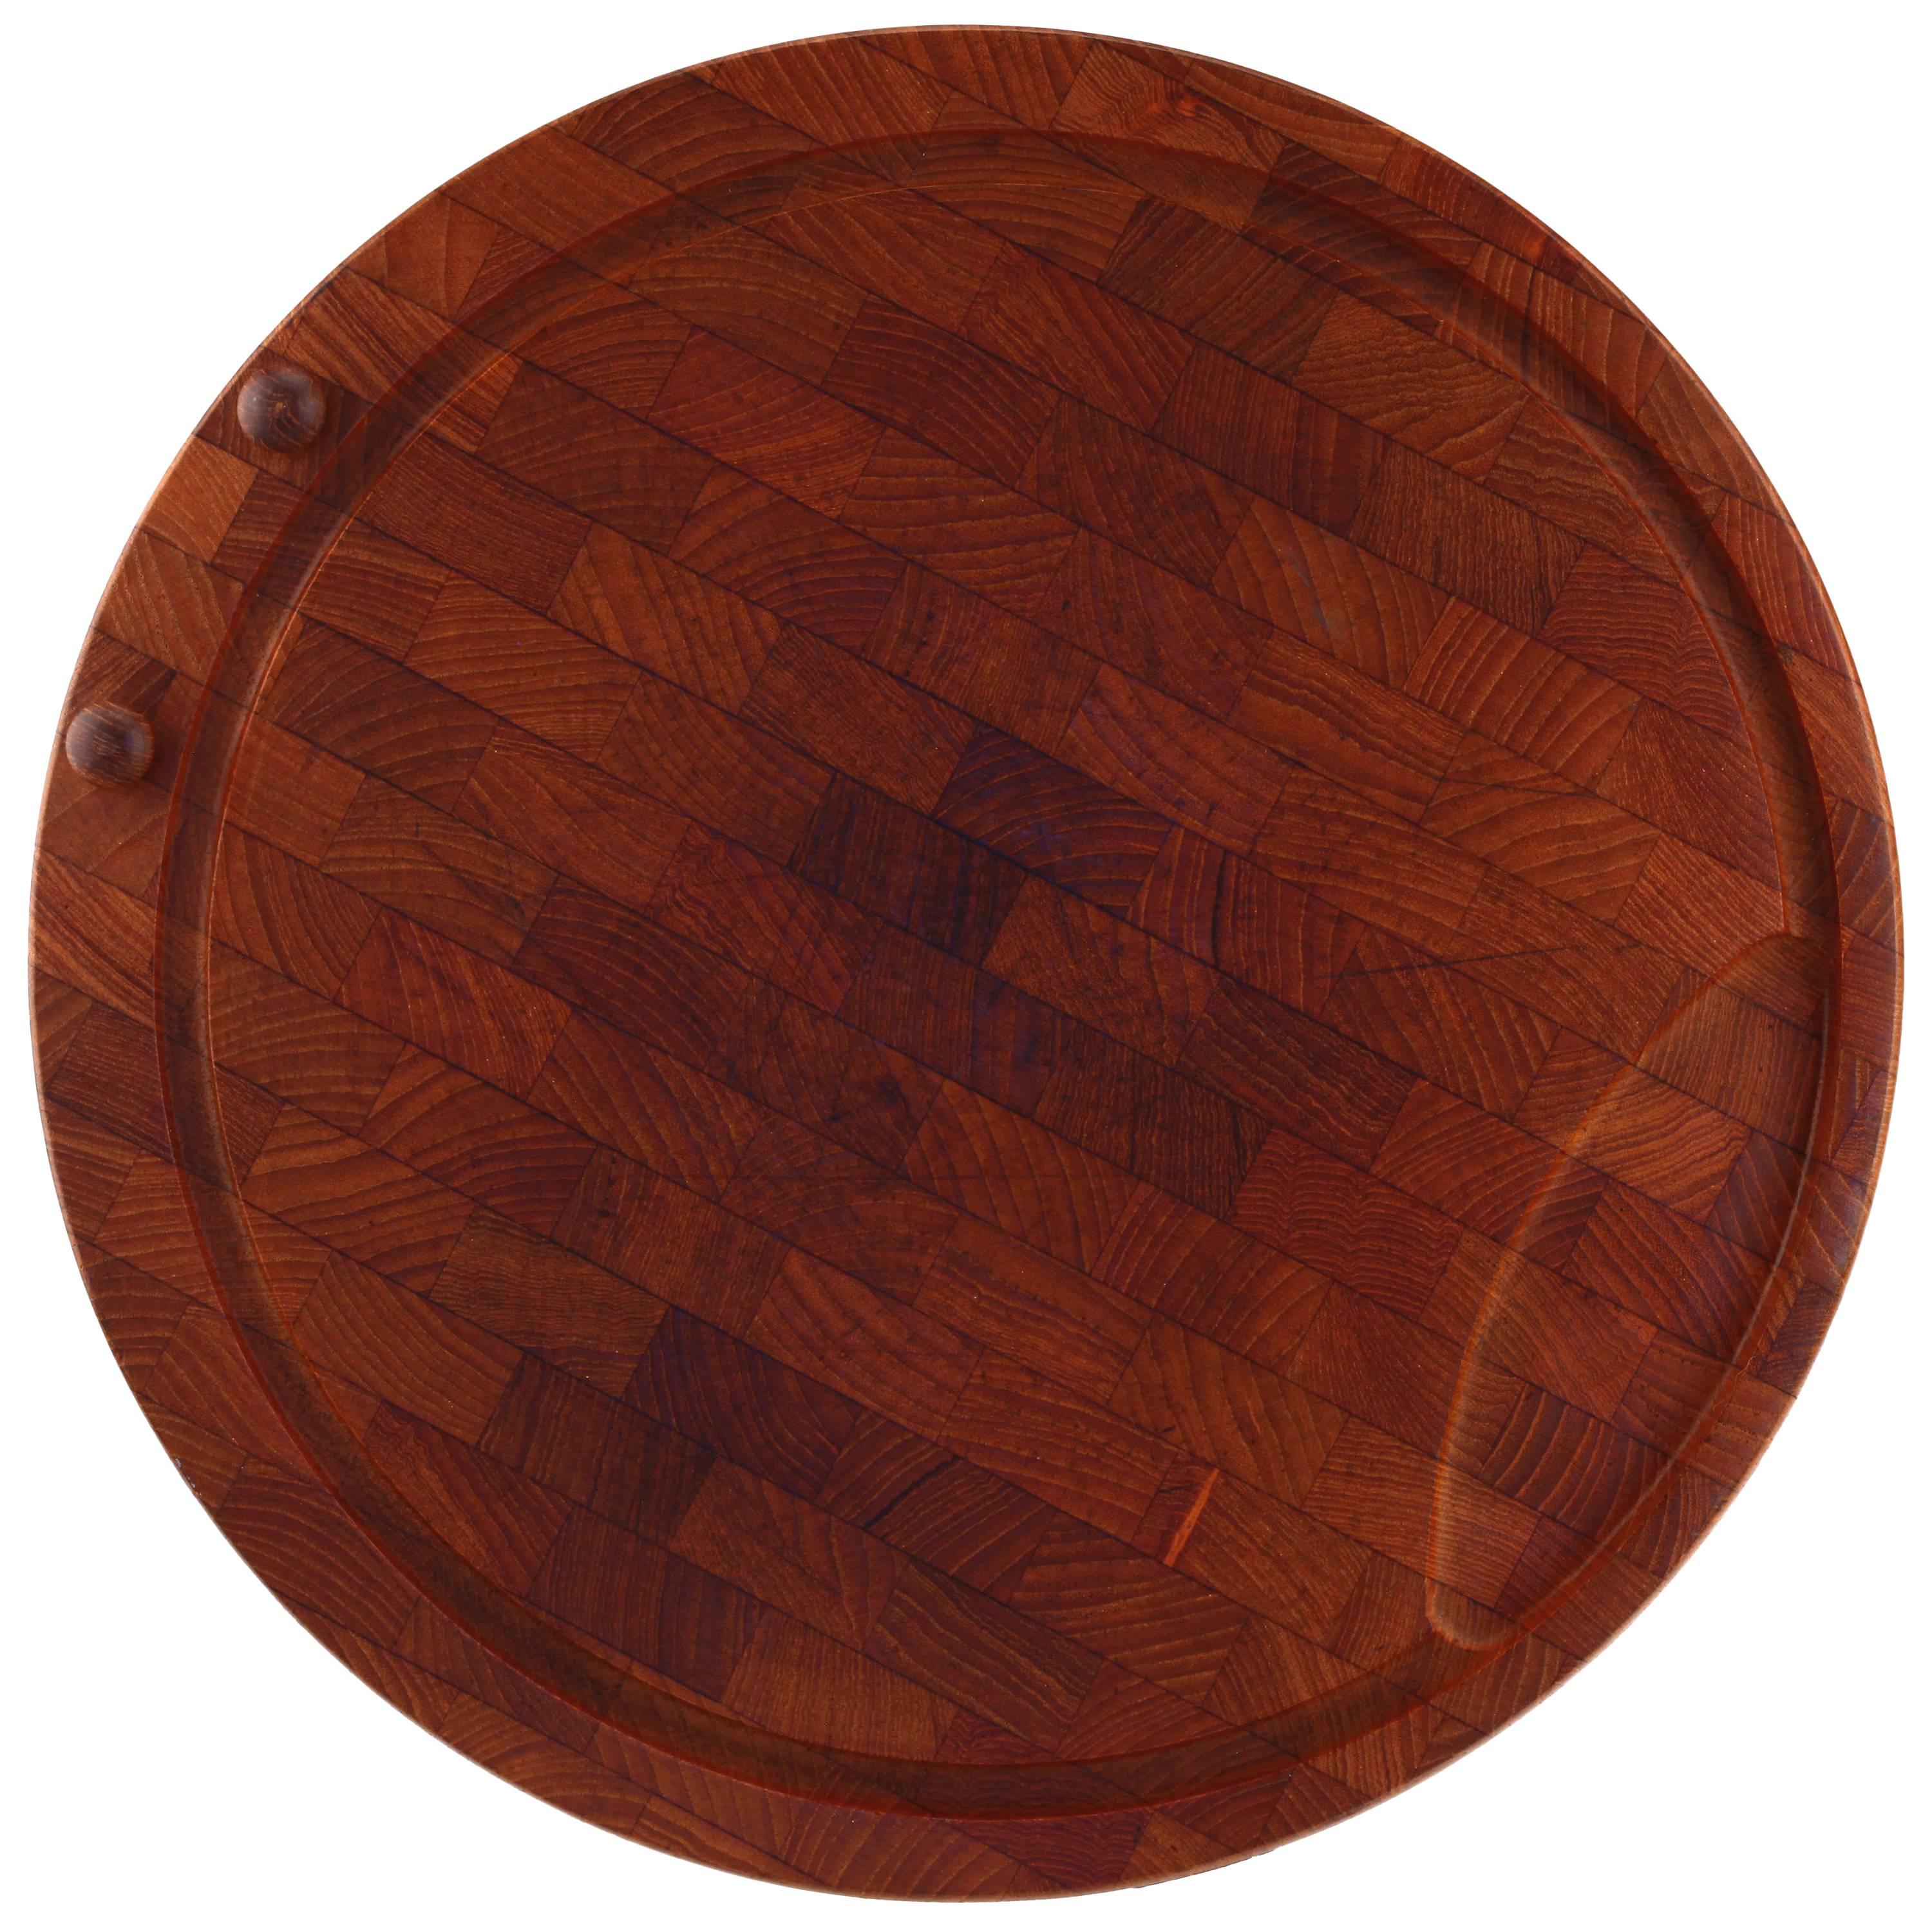 Digsmed Denmark Large Round Teak Staved Cutting Board For Sale